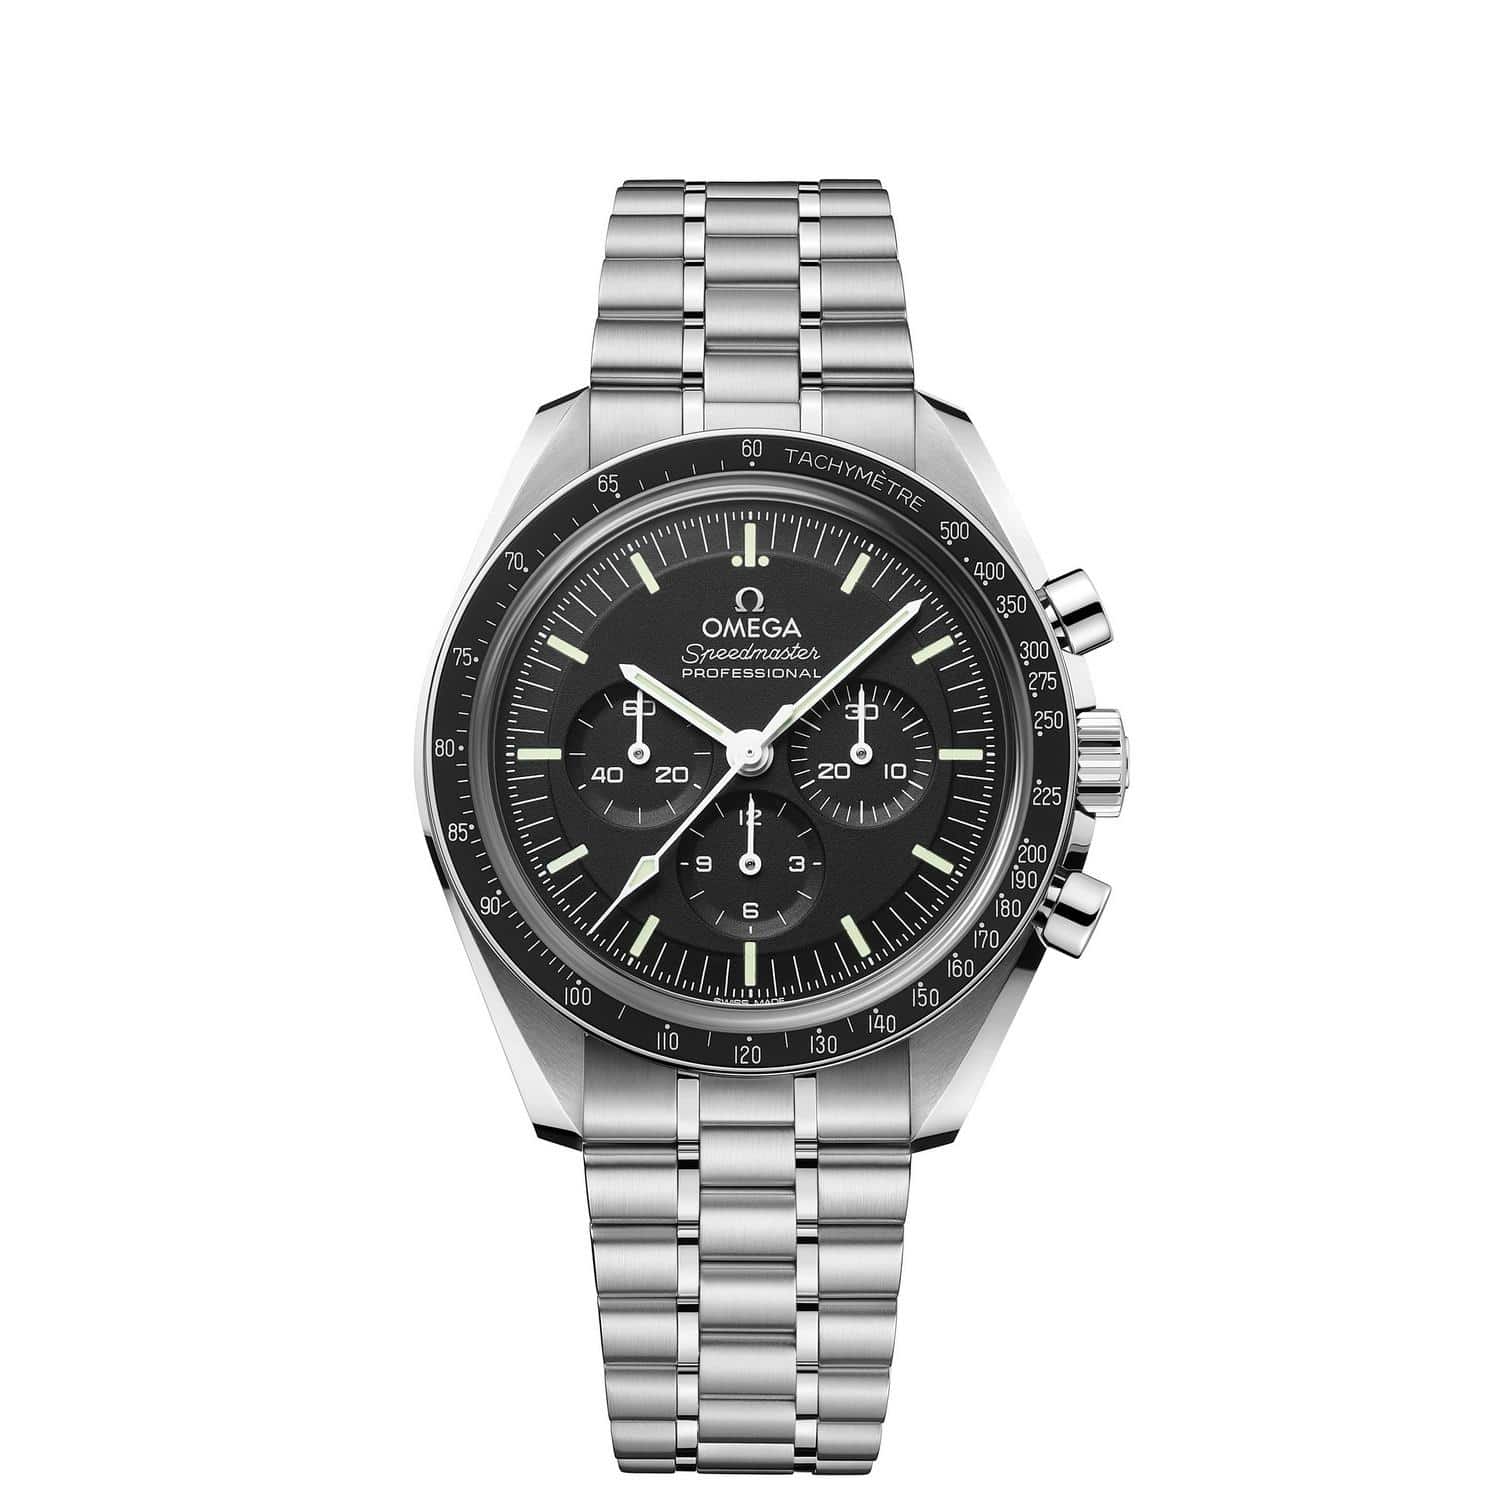 OMEGA MOONWATCH PROFESSIONAL CO-AXIAL MASTER CHRONOMETER - O31030425001002